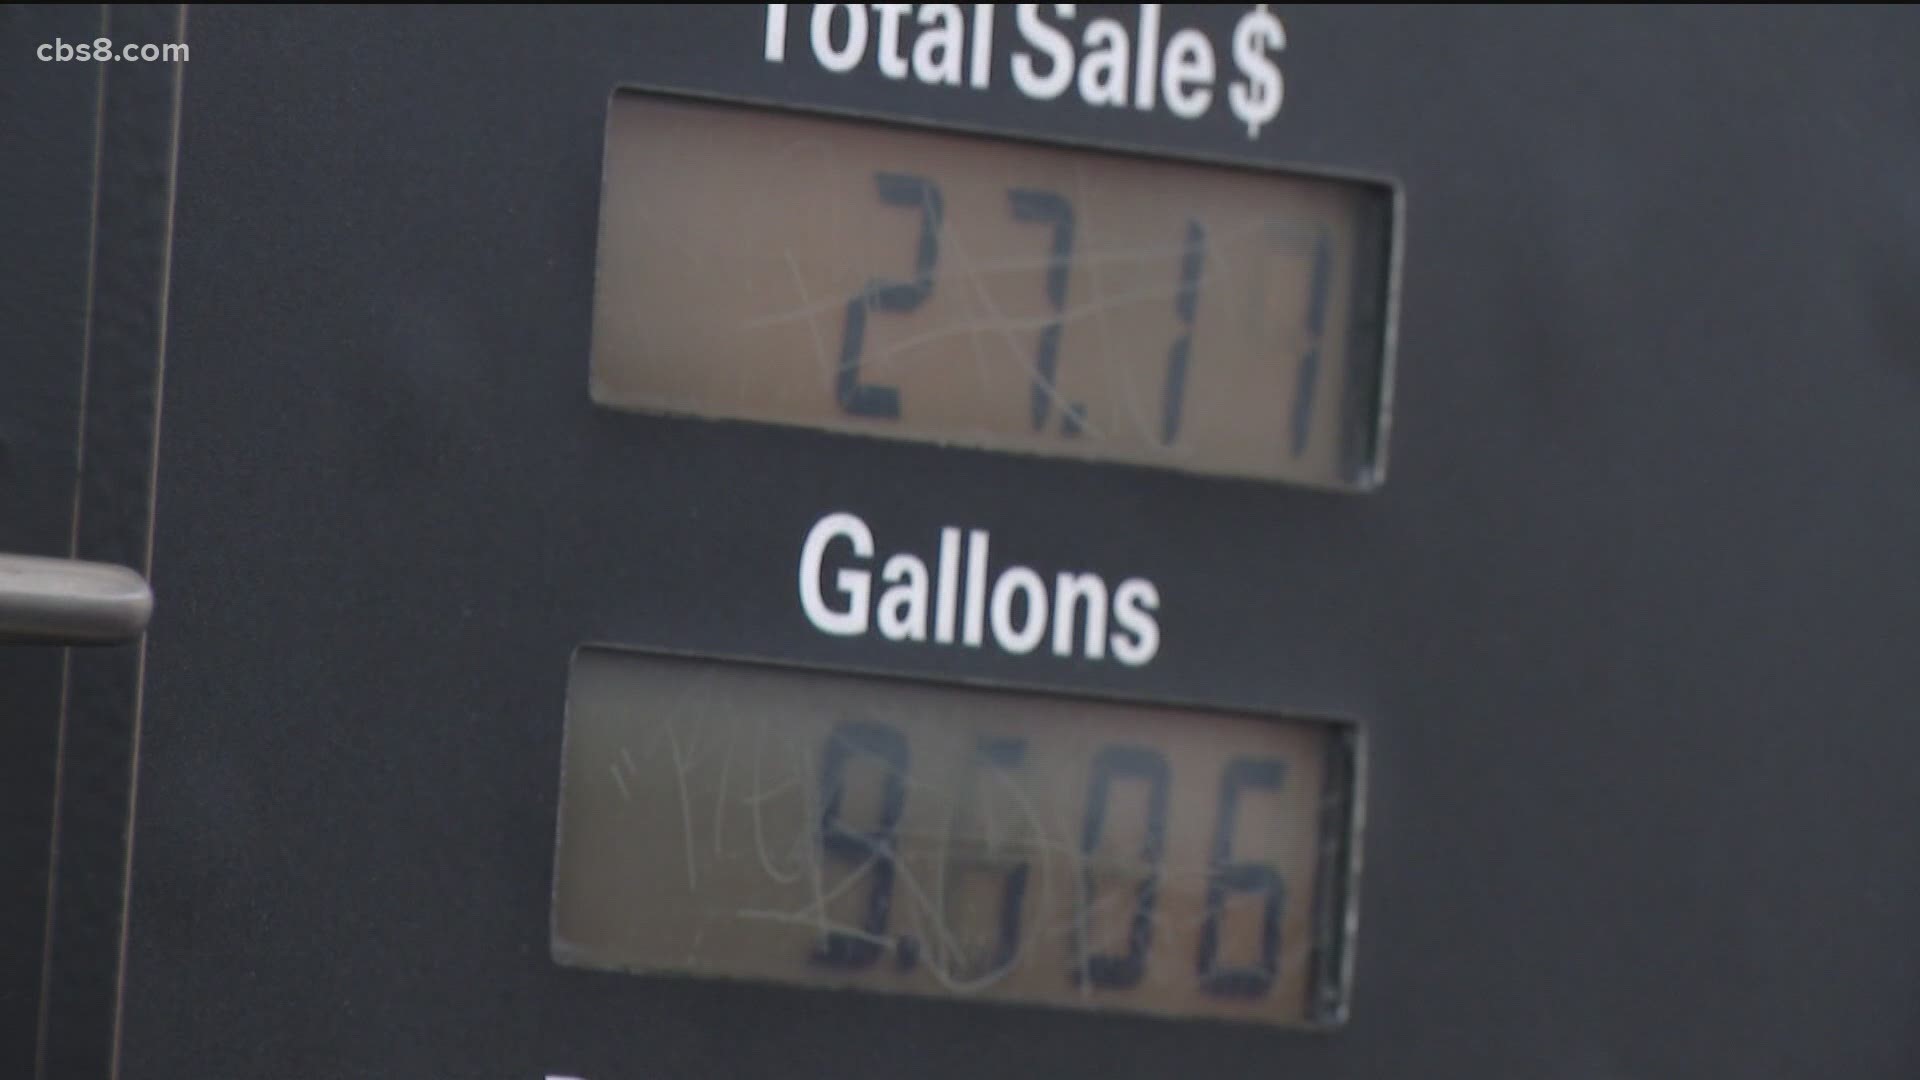 If you thought gas prices were already high, get ready for them to go up again but not by much. It will be at least 8 cents more to fill up a 14-gallon tank.